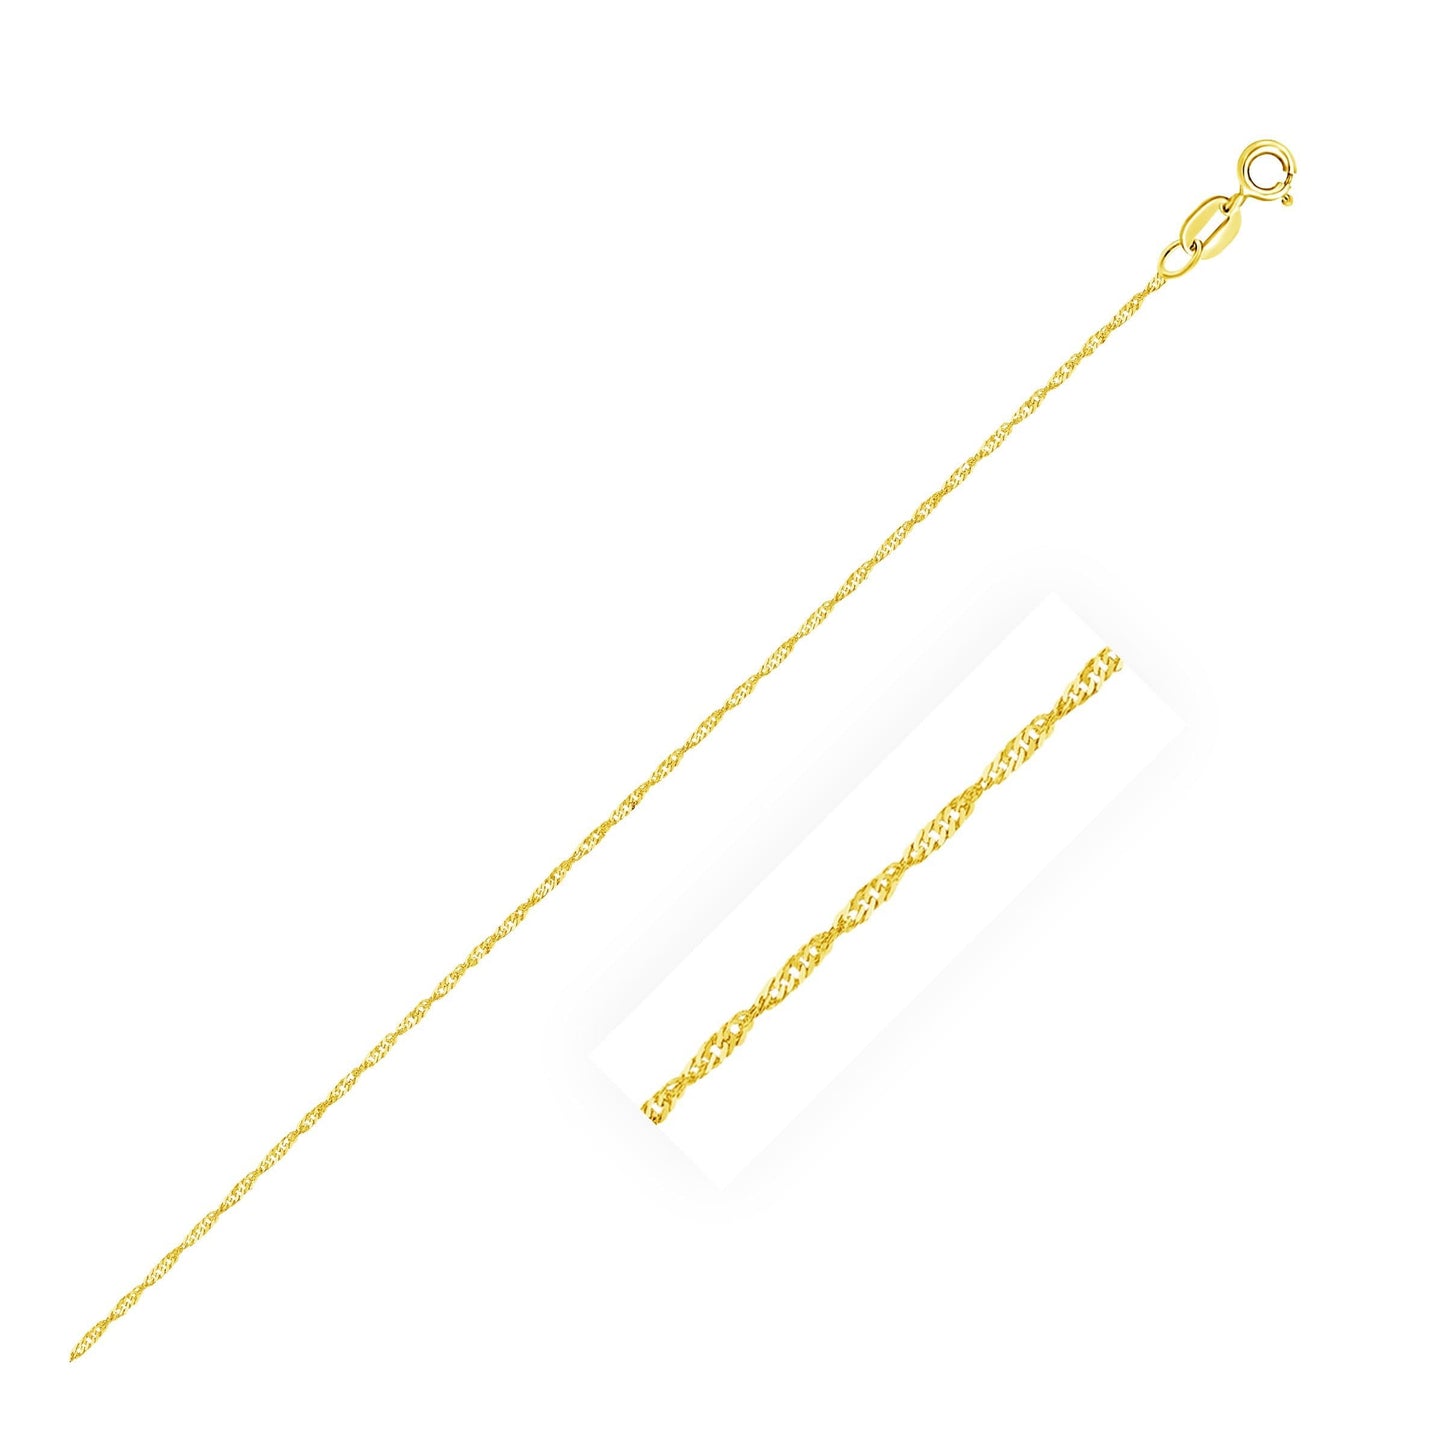 14k Yellow Gold Singapore Chain in 0.8 mm